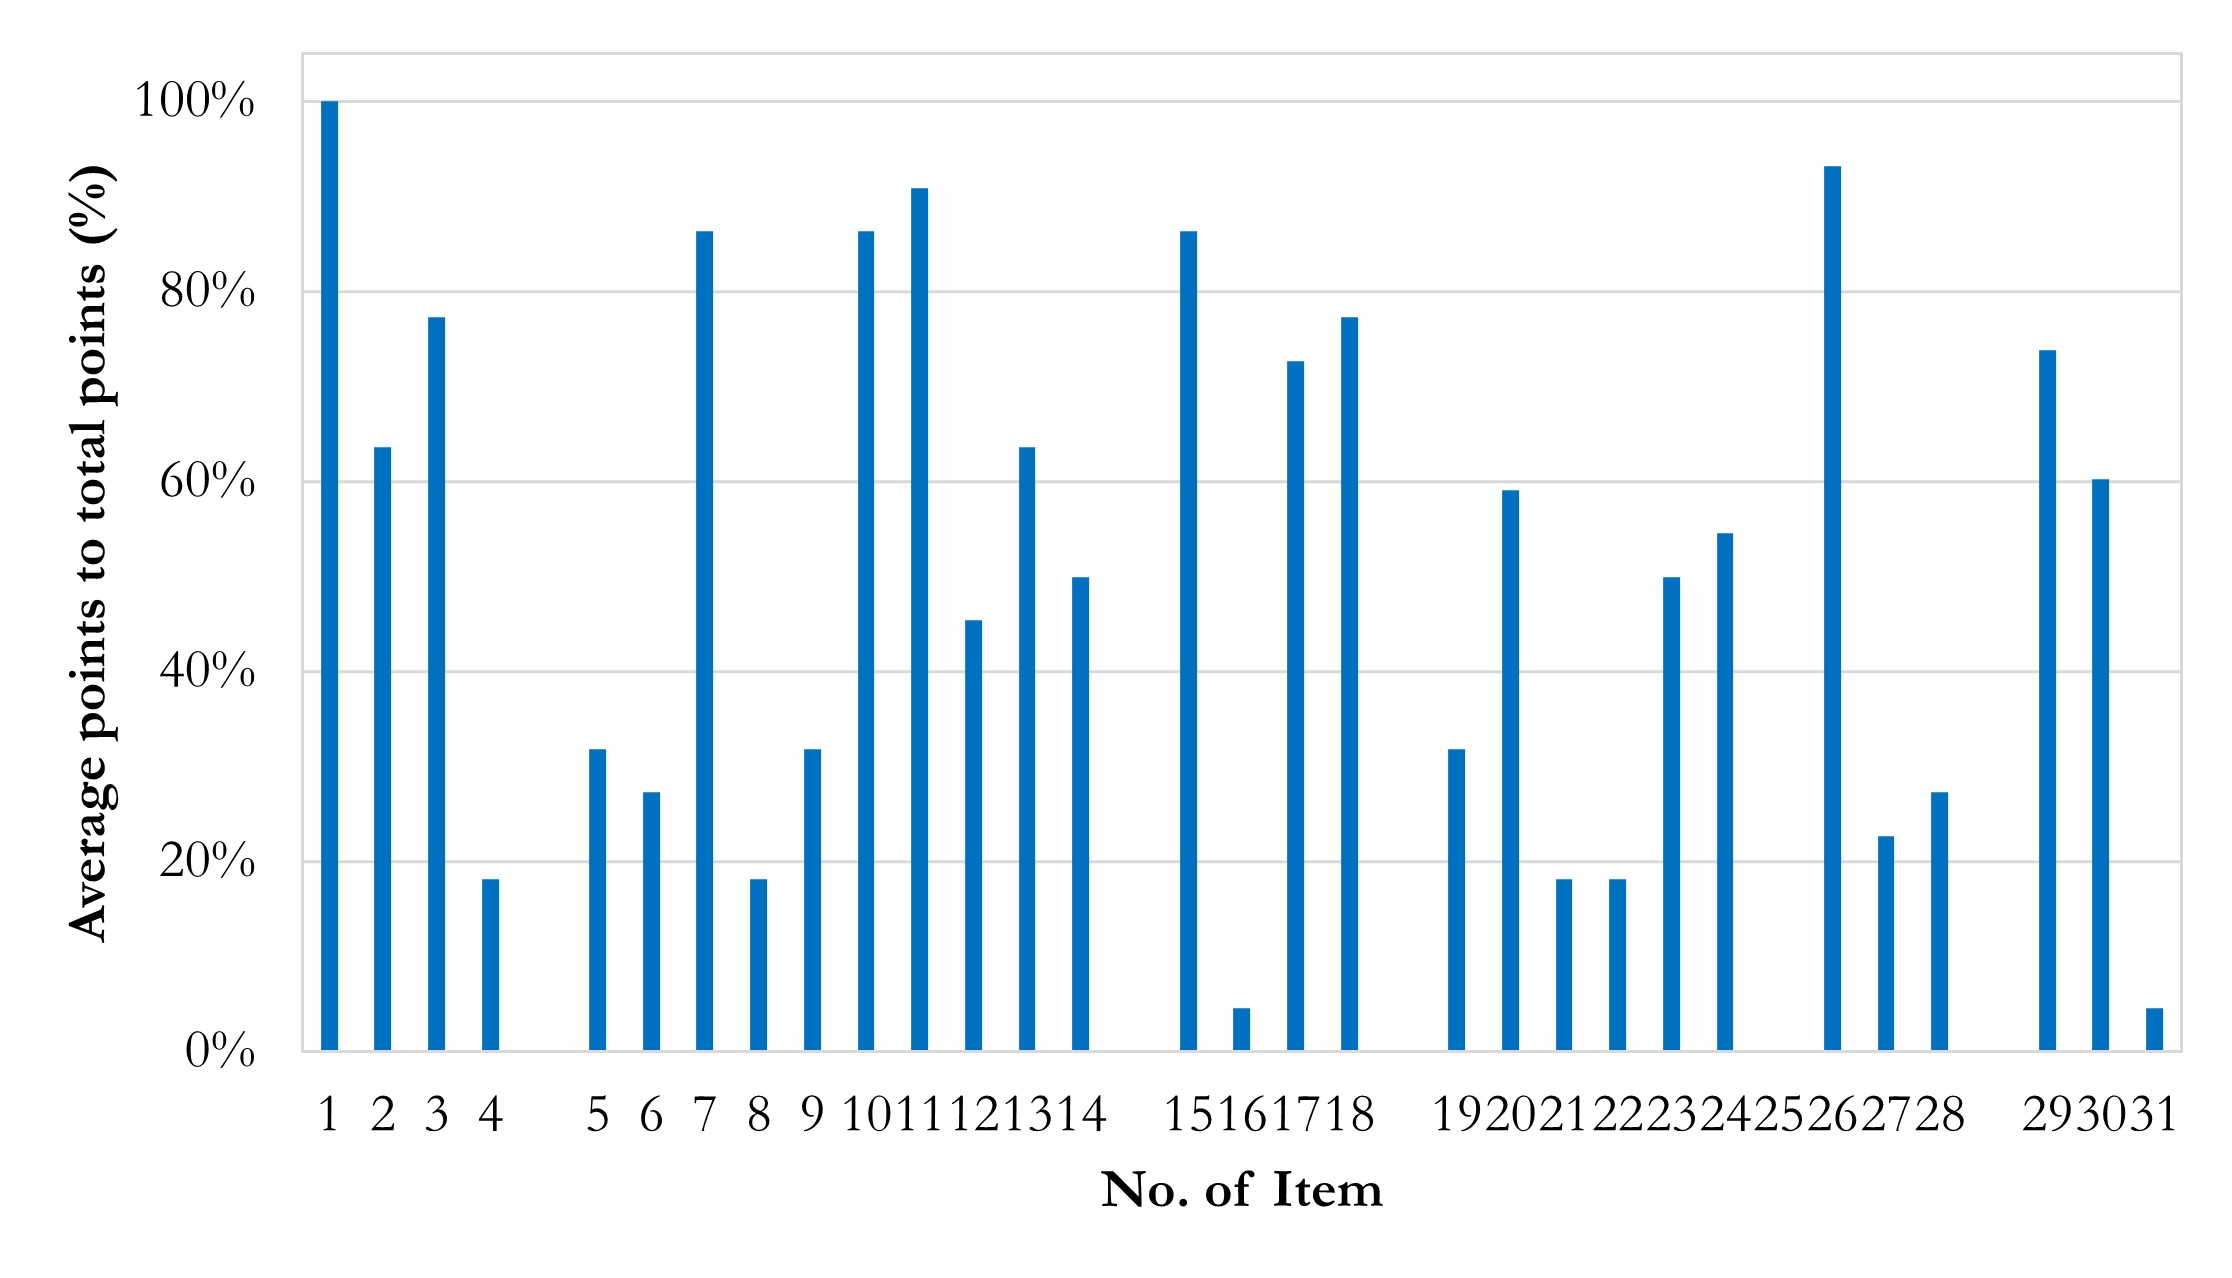 Column chart of average points in items. Average points in Item 16 and 31 are impressively low. Average points in Item 1 are quite high.